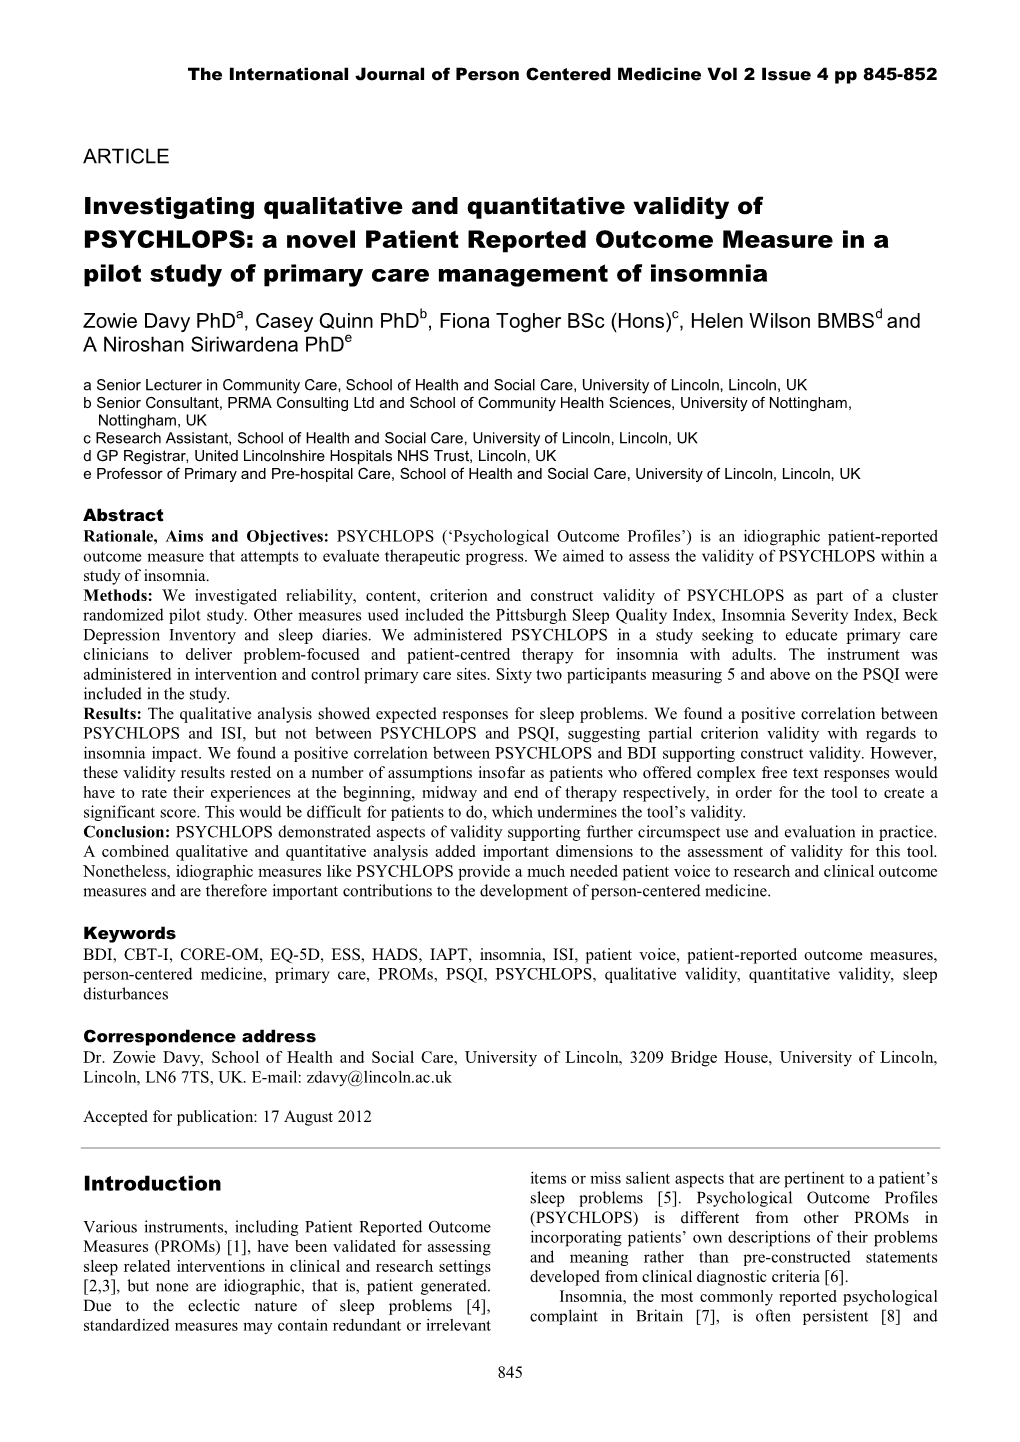 A Novel Patient Reported Outcome Measure in a Pilot Study of Primary Care Management of Insomnia